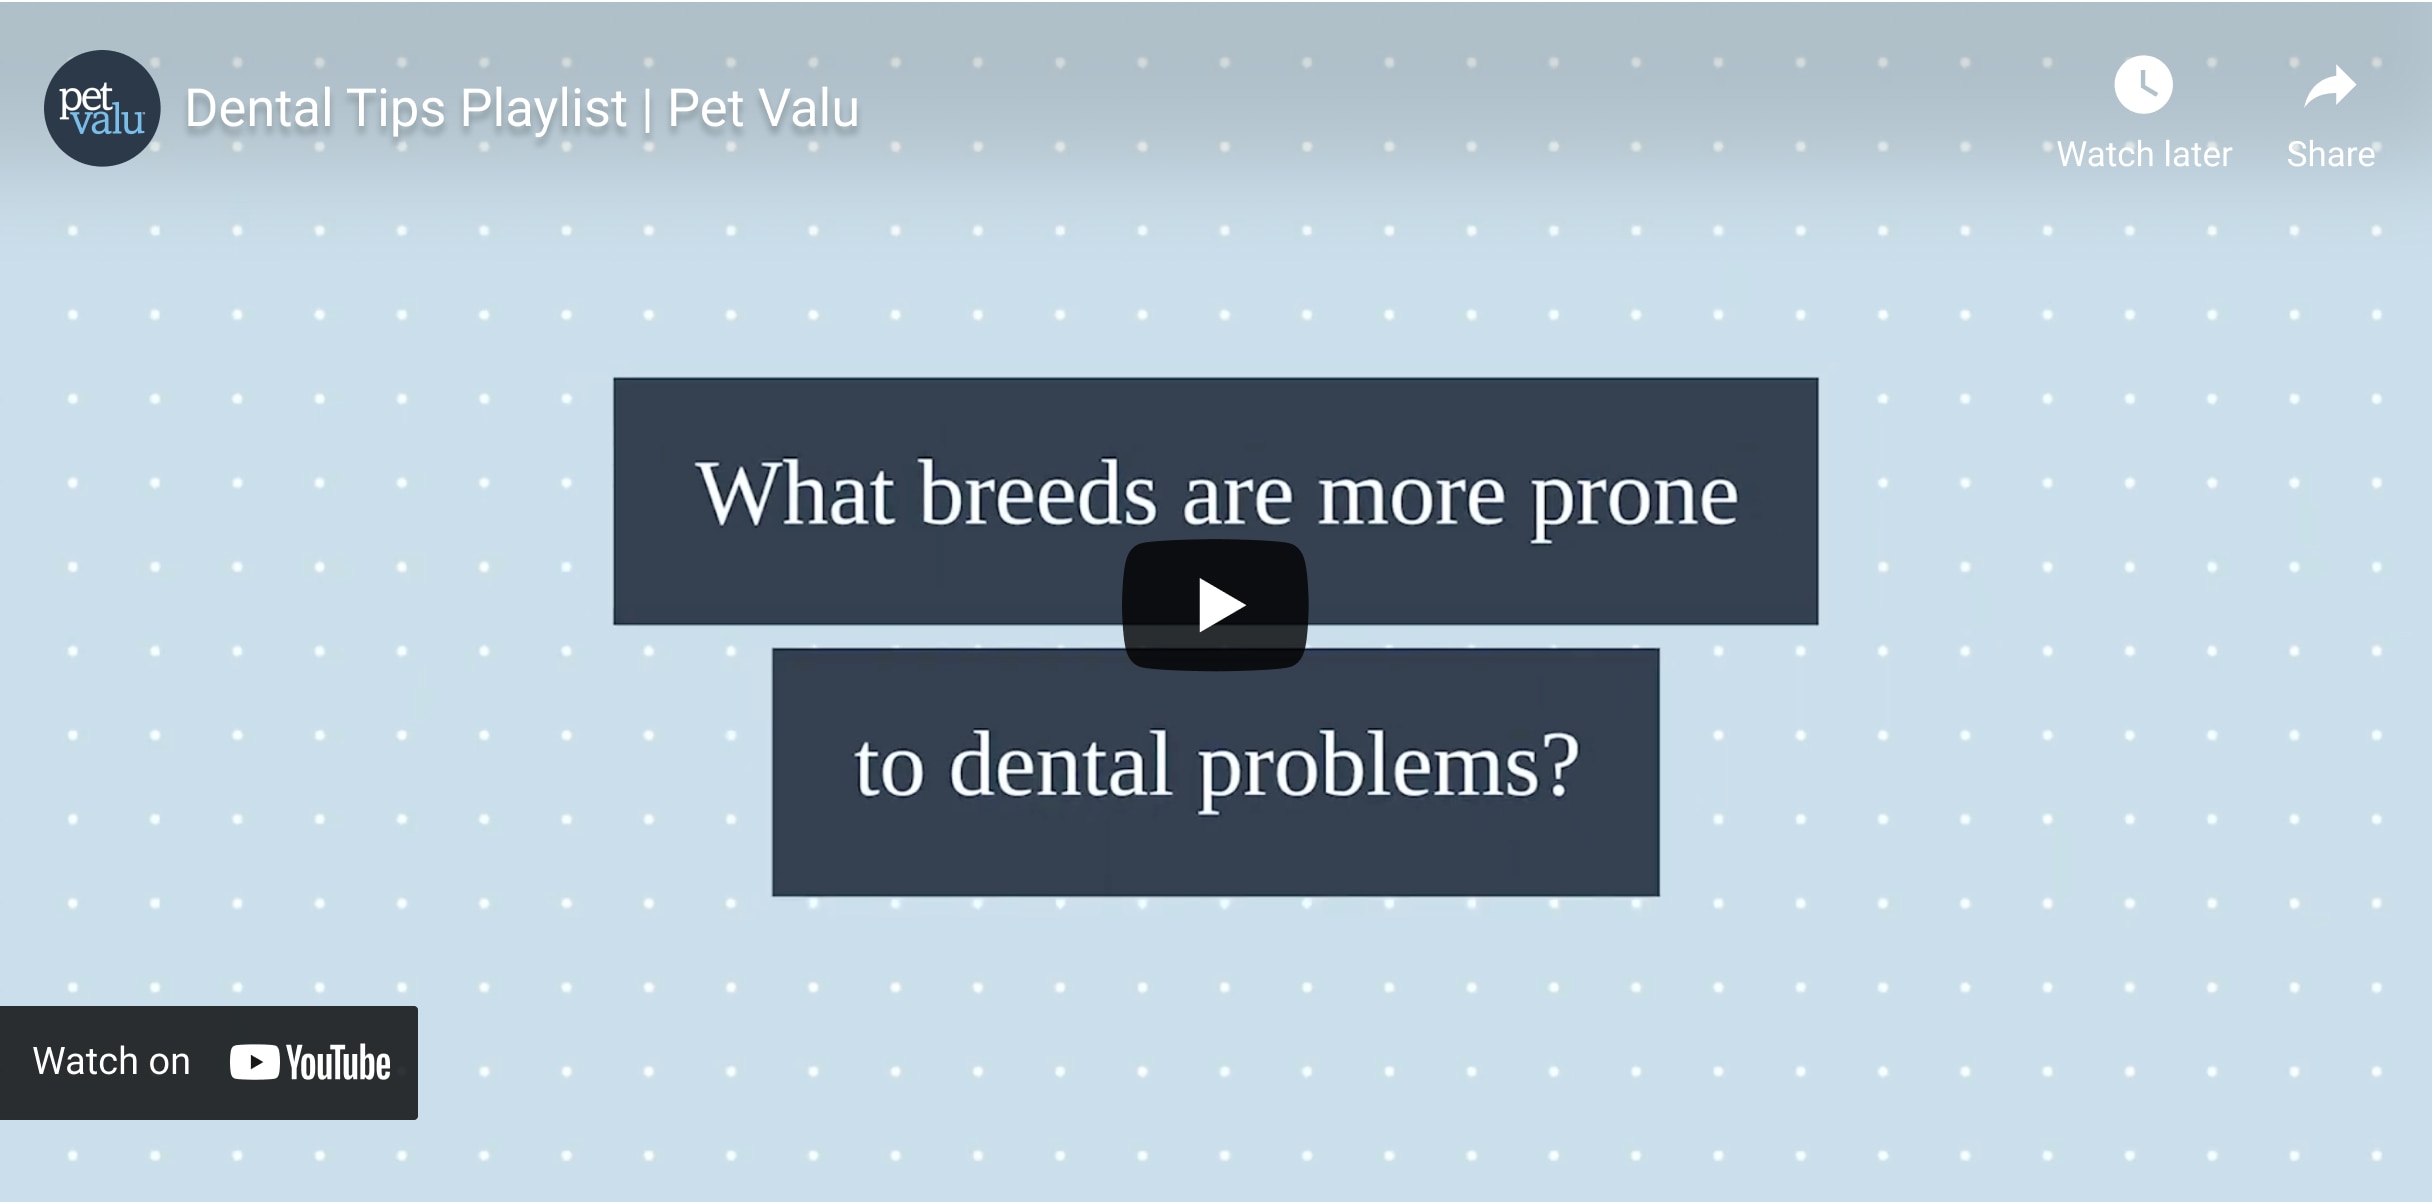 Dental Health Playlist – What breeds are more prone to dental problems?